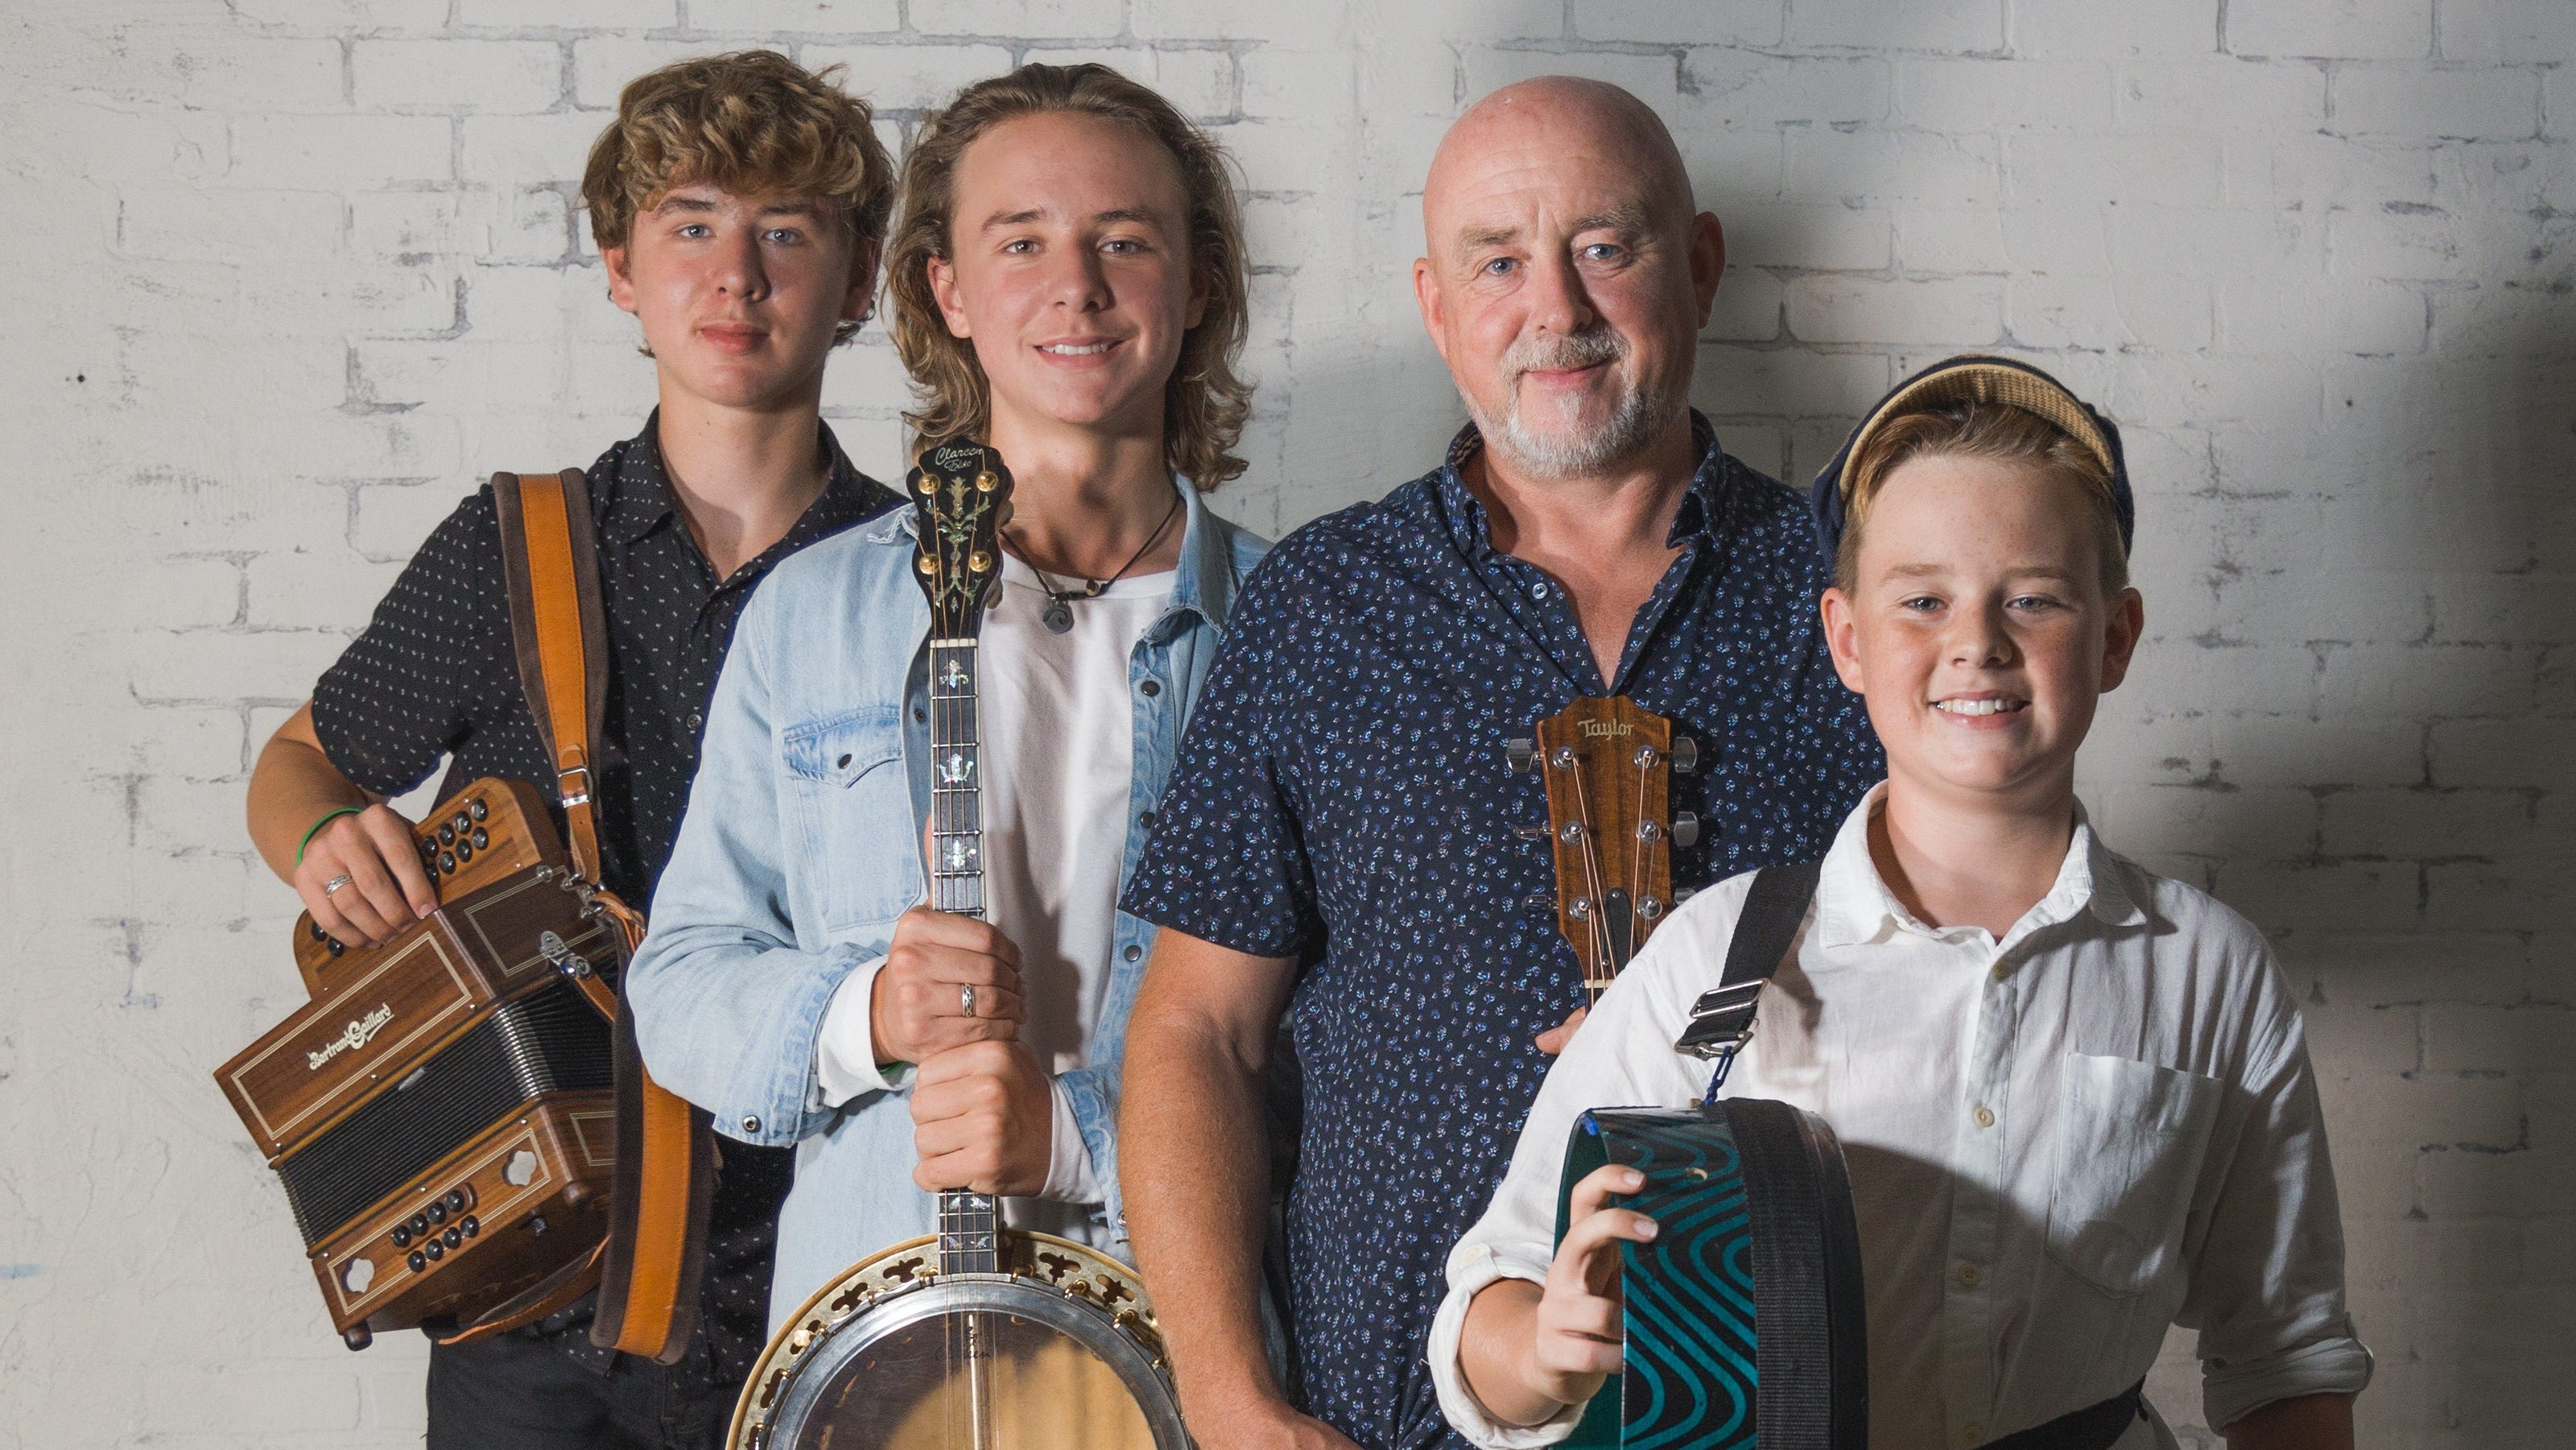 Irish music is coming to the historic Ritz Theater in Toccoa.